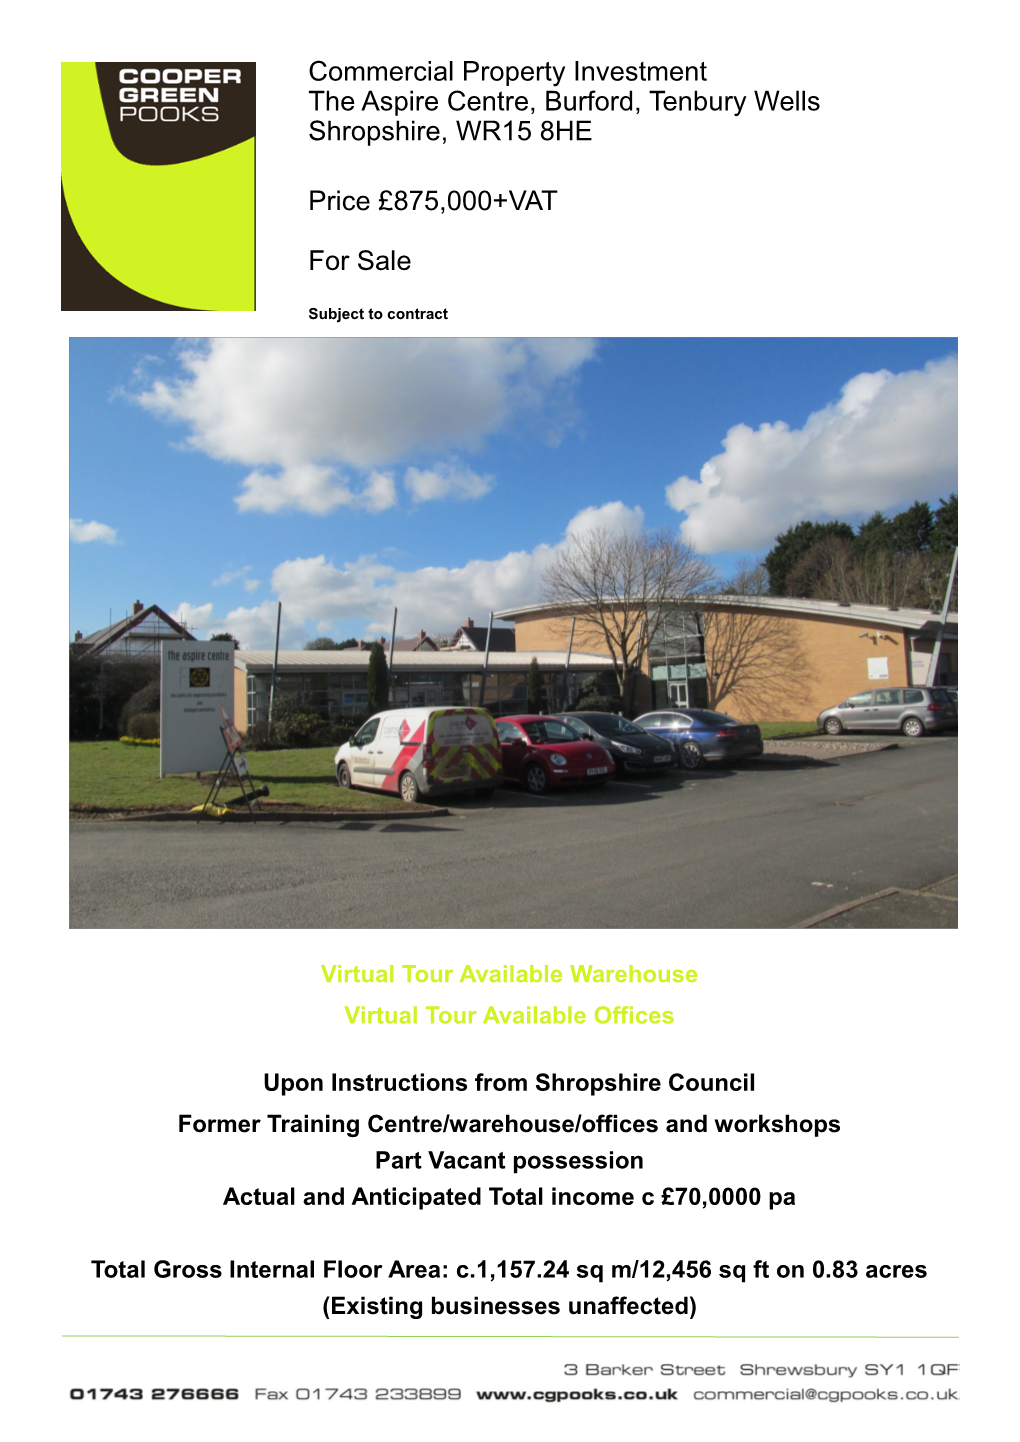 Commercial Property Investment the Aspire Centre, Burford, Tenbury Wells Shropshire, WR15 8HE